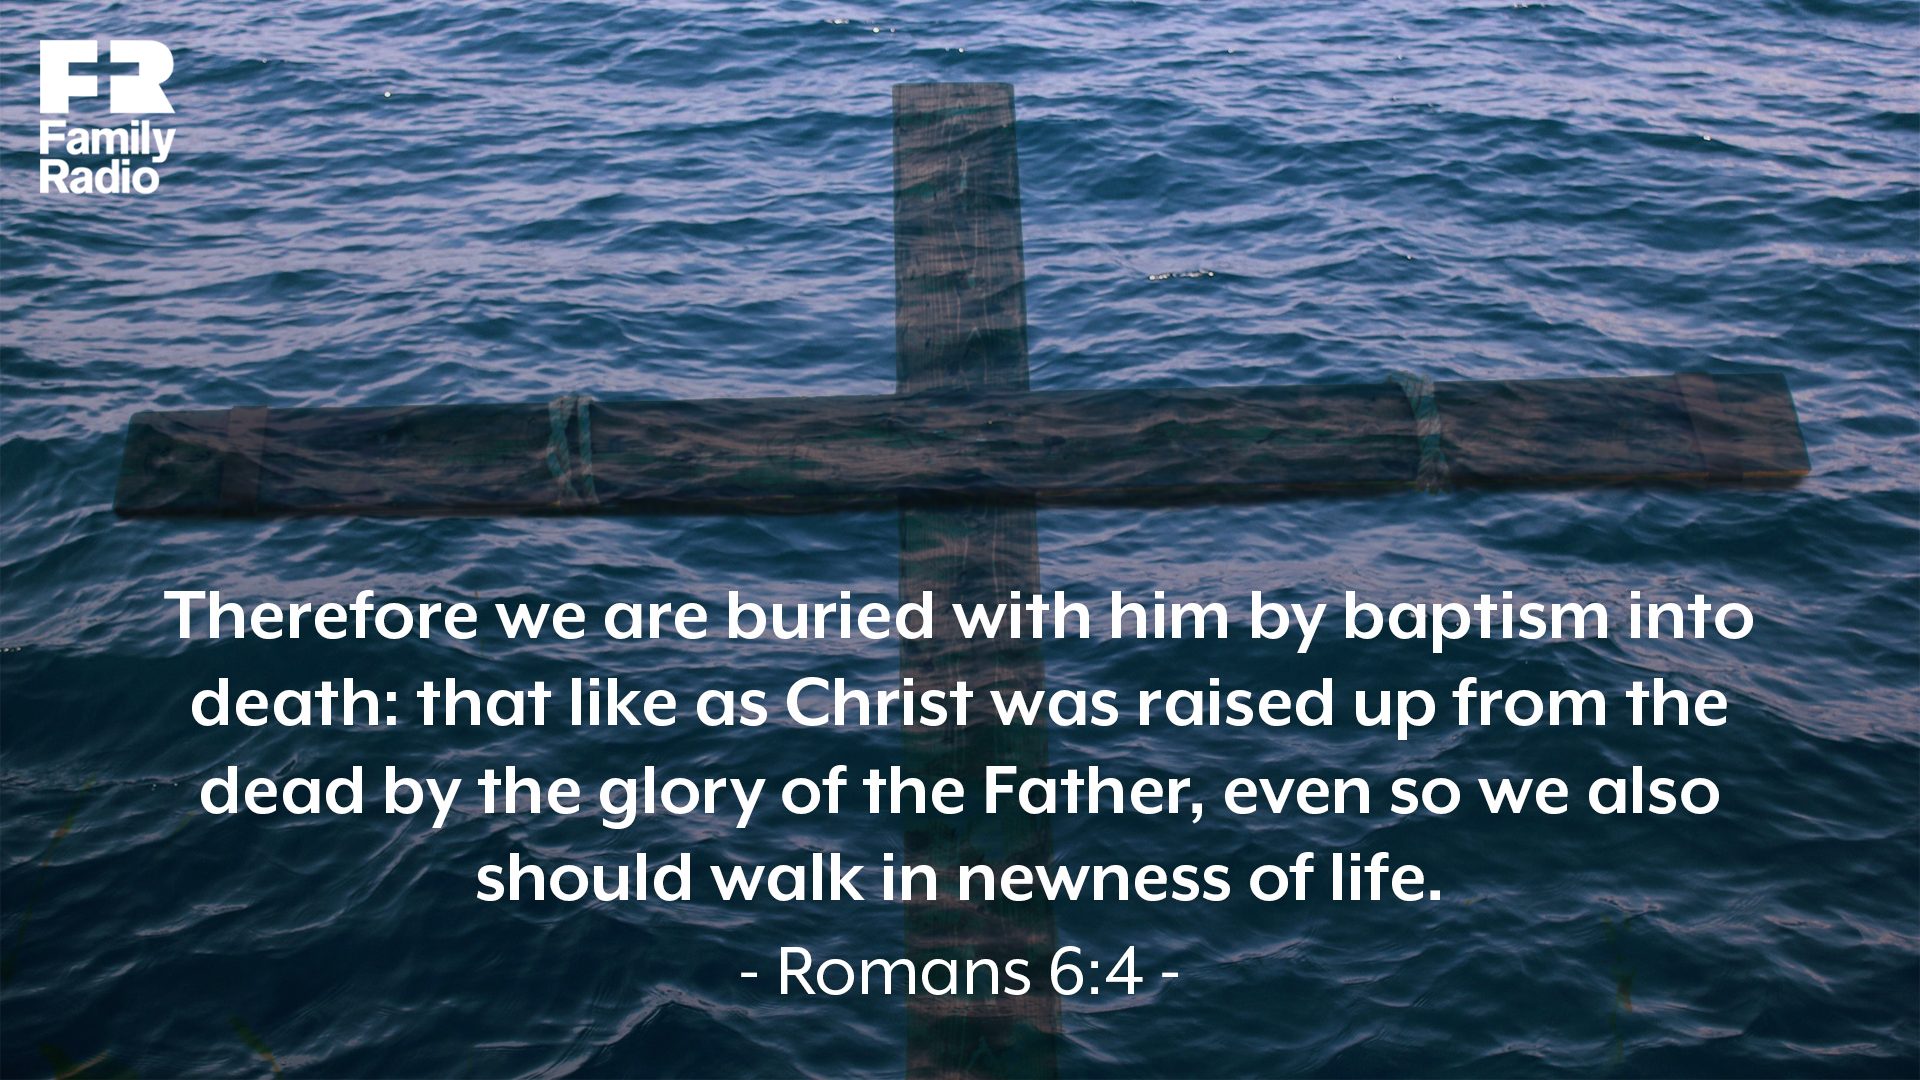 "Therefore we are buried with him by baptism into death: that like as Christ was raised up from the dead by the glory of the Father, even so we also should walk in newness of life."